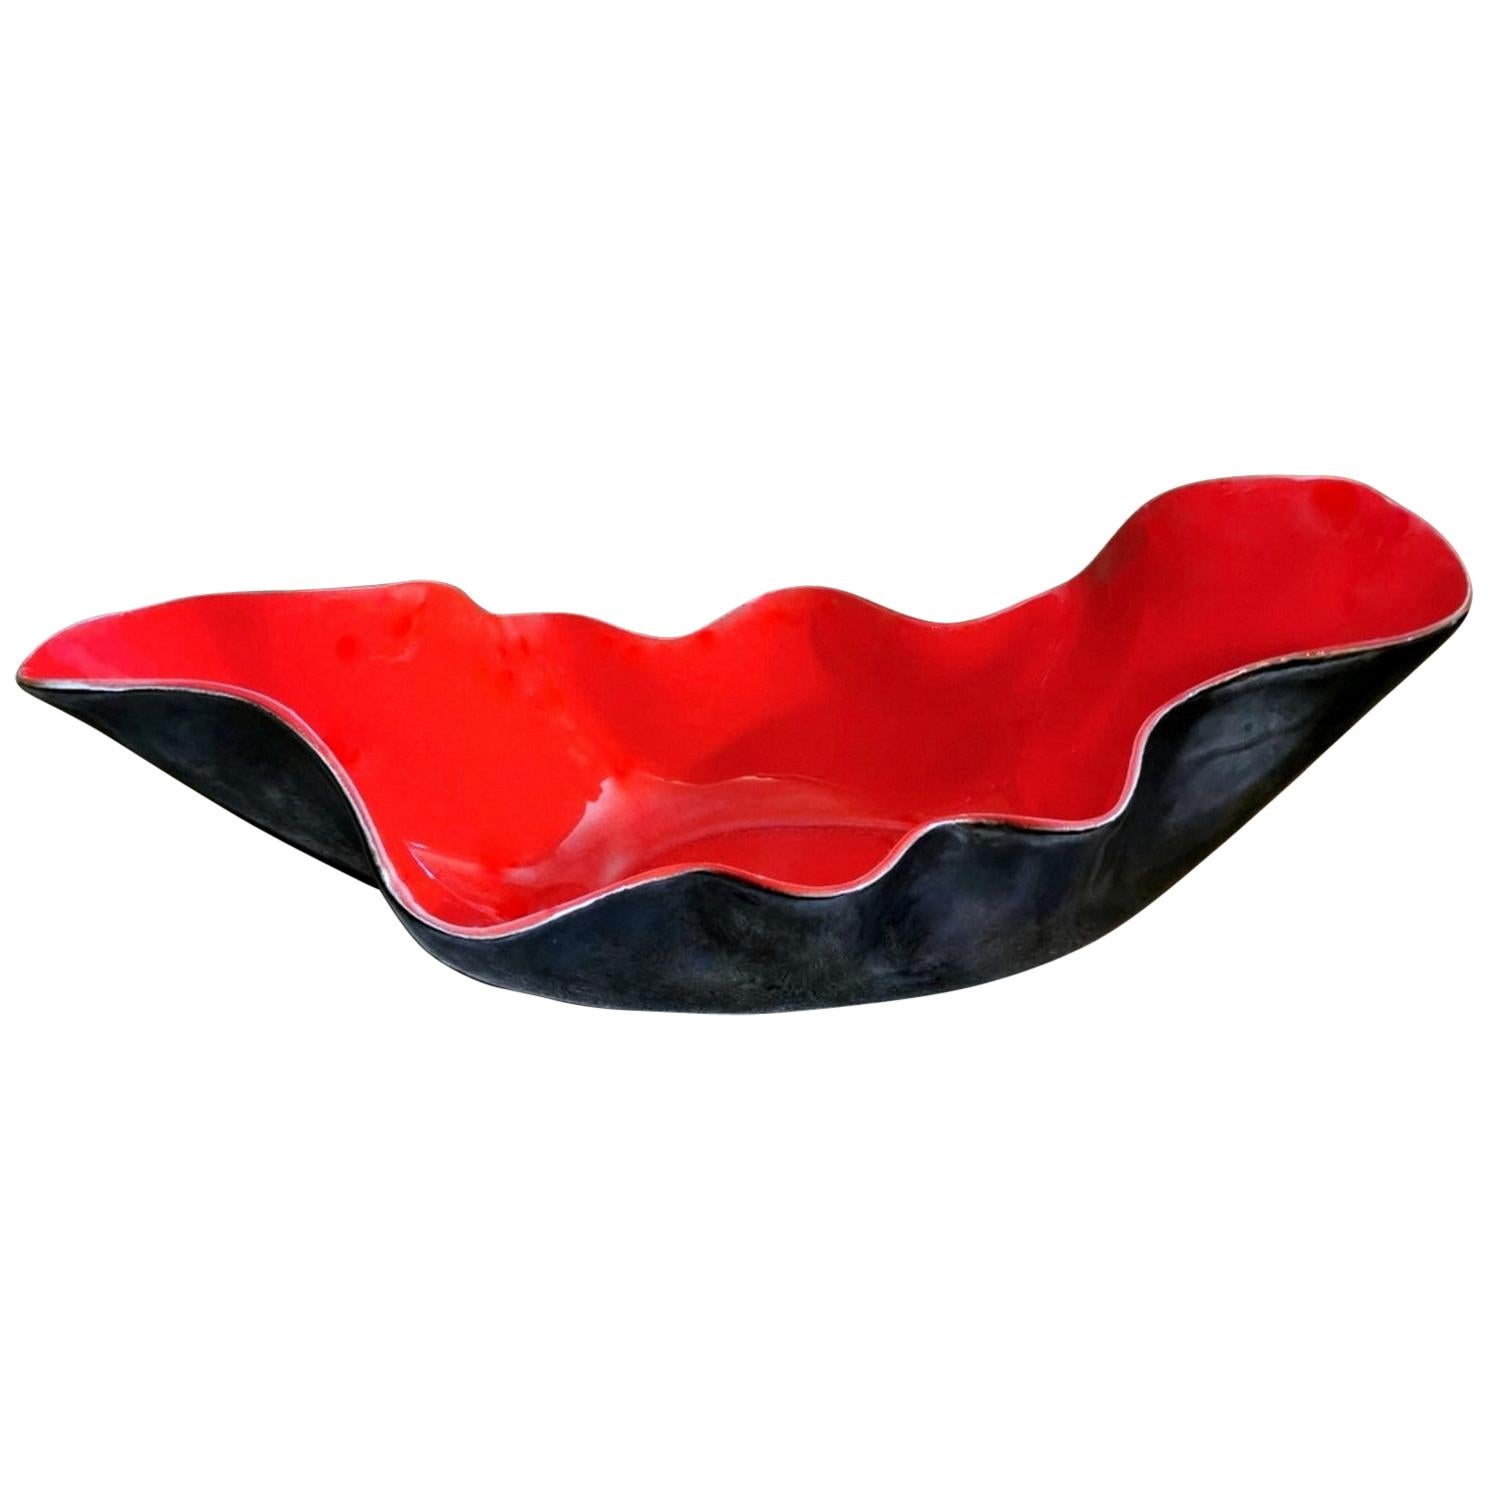 Rockabilly Style French Centrepiece Red and Black Ceramic For Sale